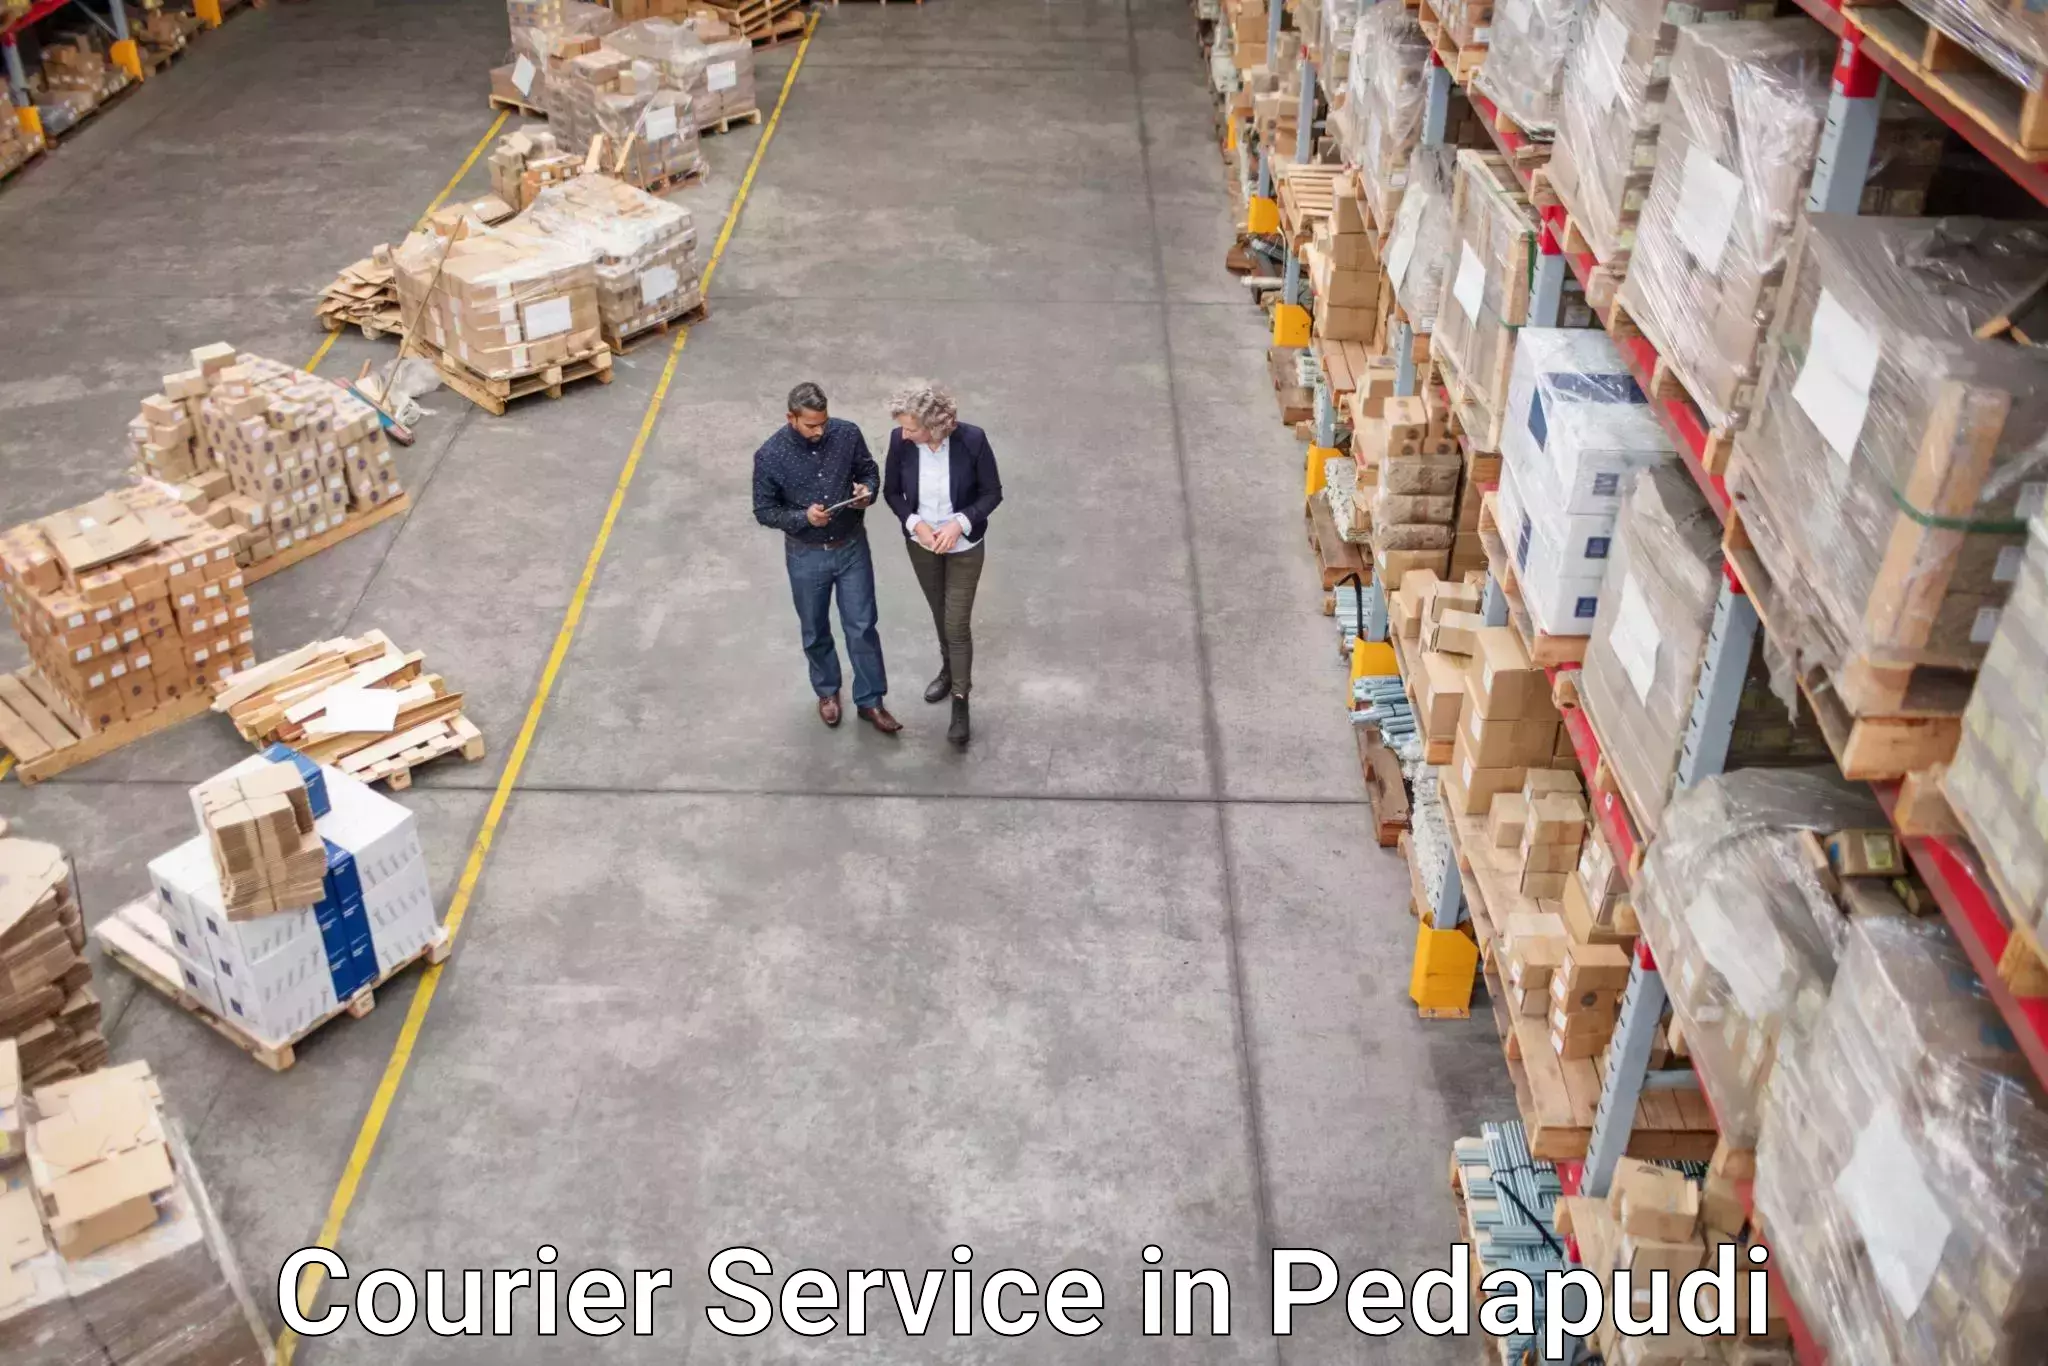 Global delivery options in Pedapudi